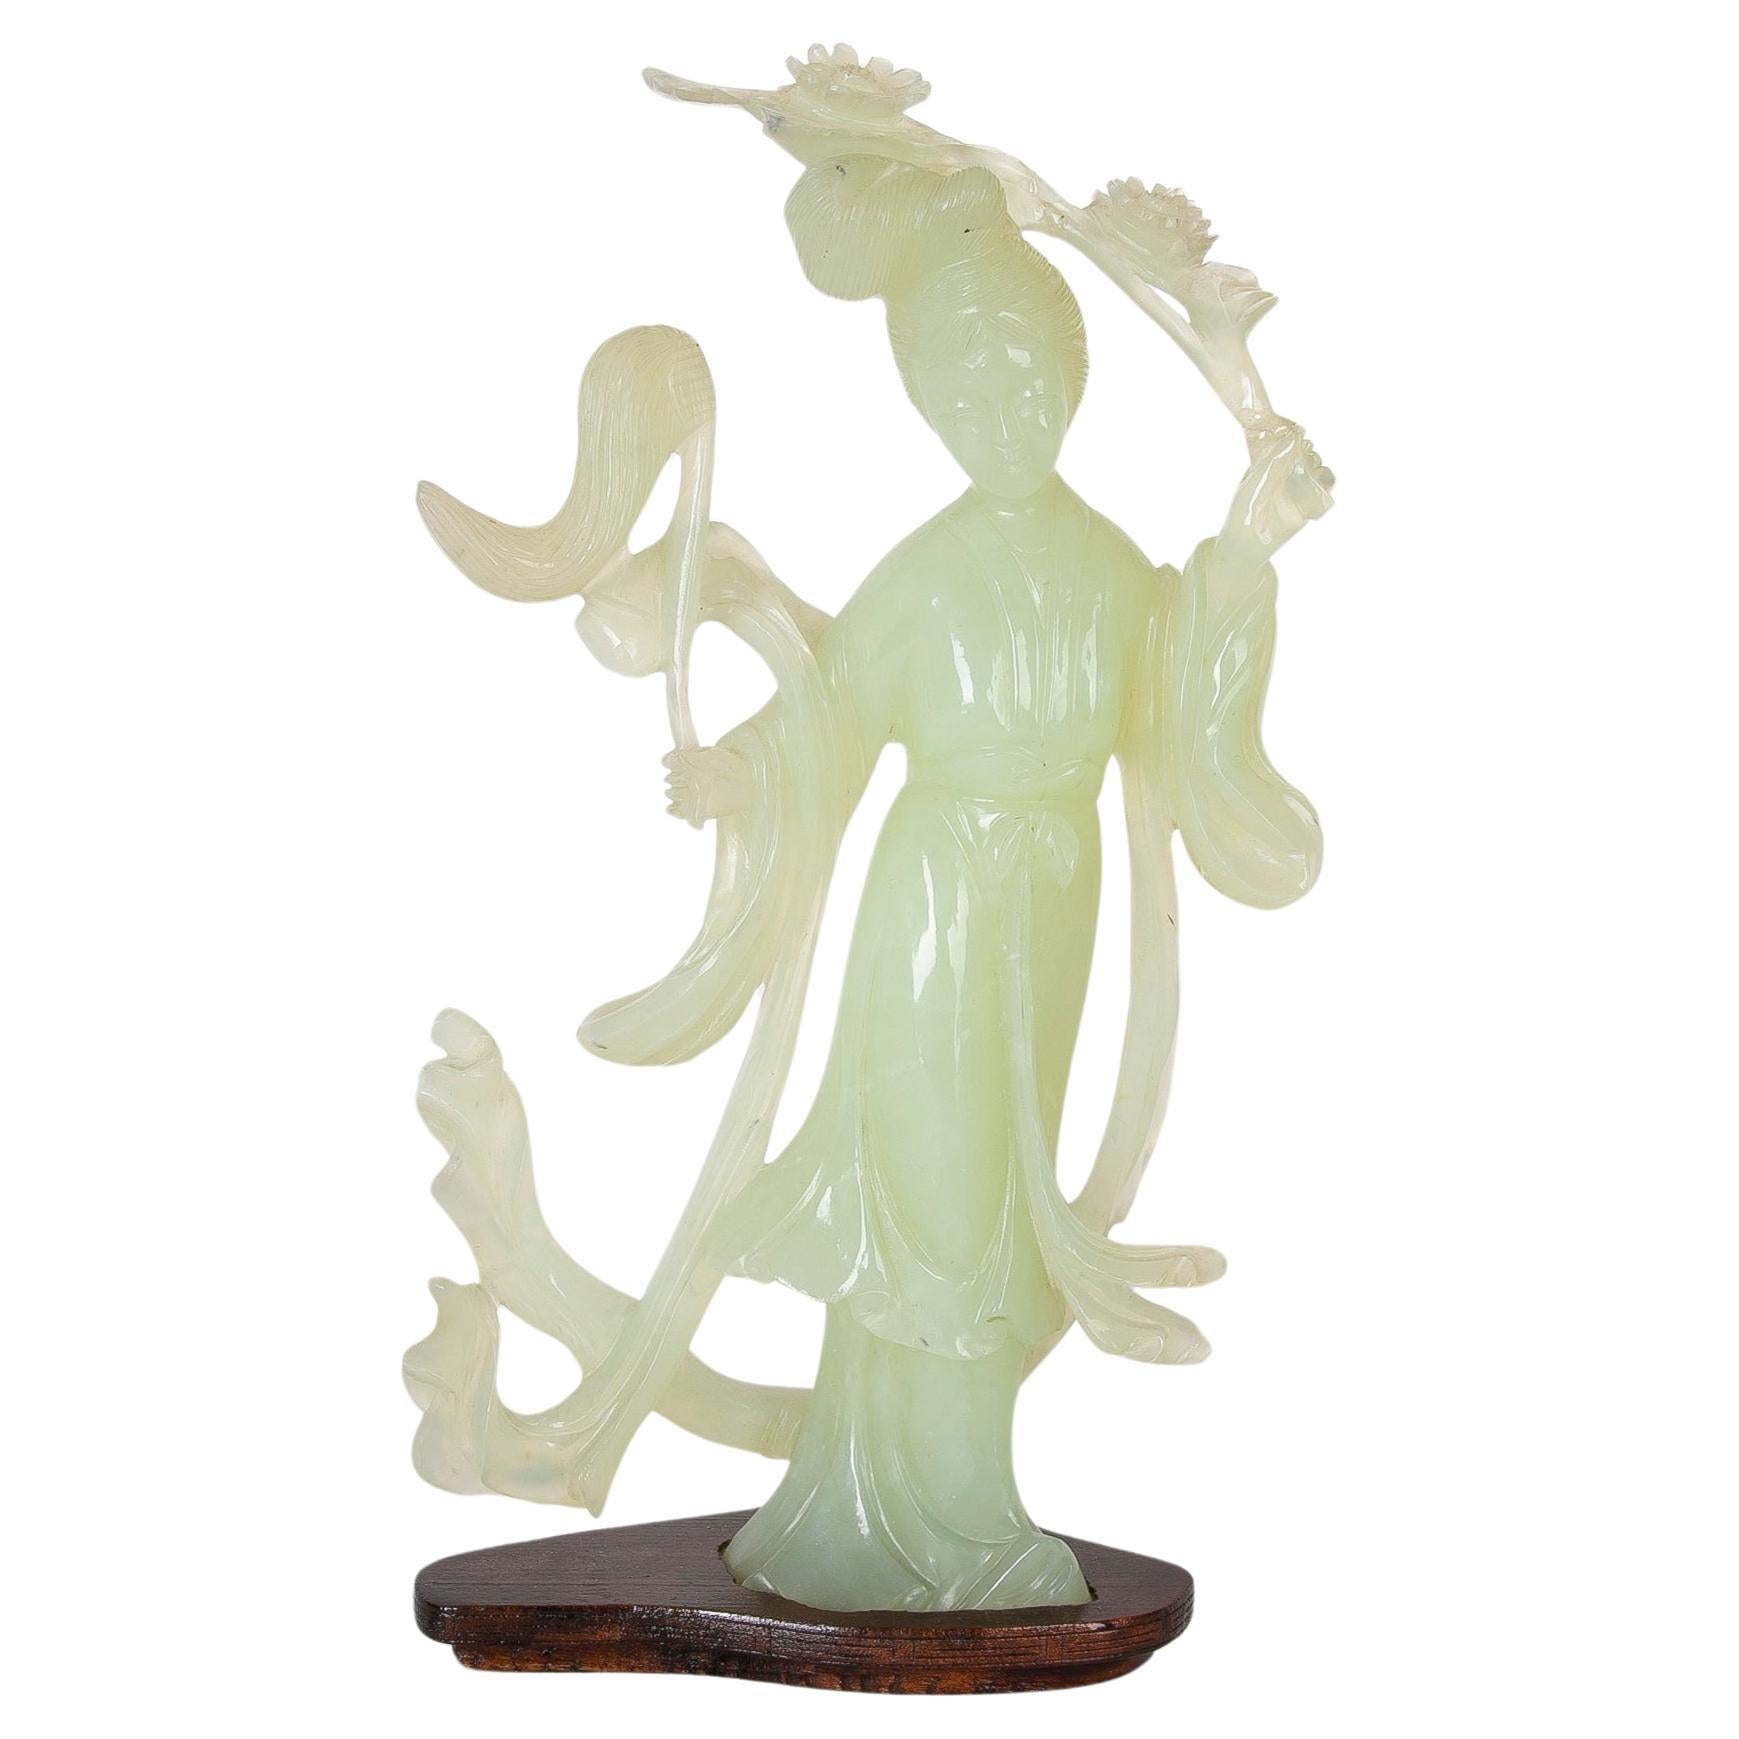 Hand-Carved Jadeite Figurine of an Oriental Woman on a Wooden Base